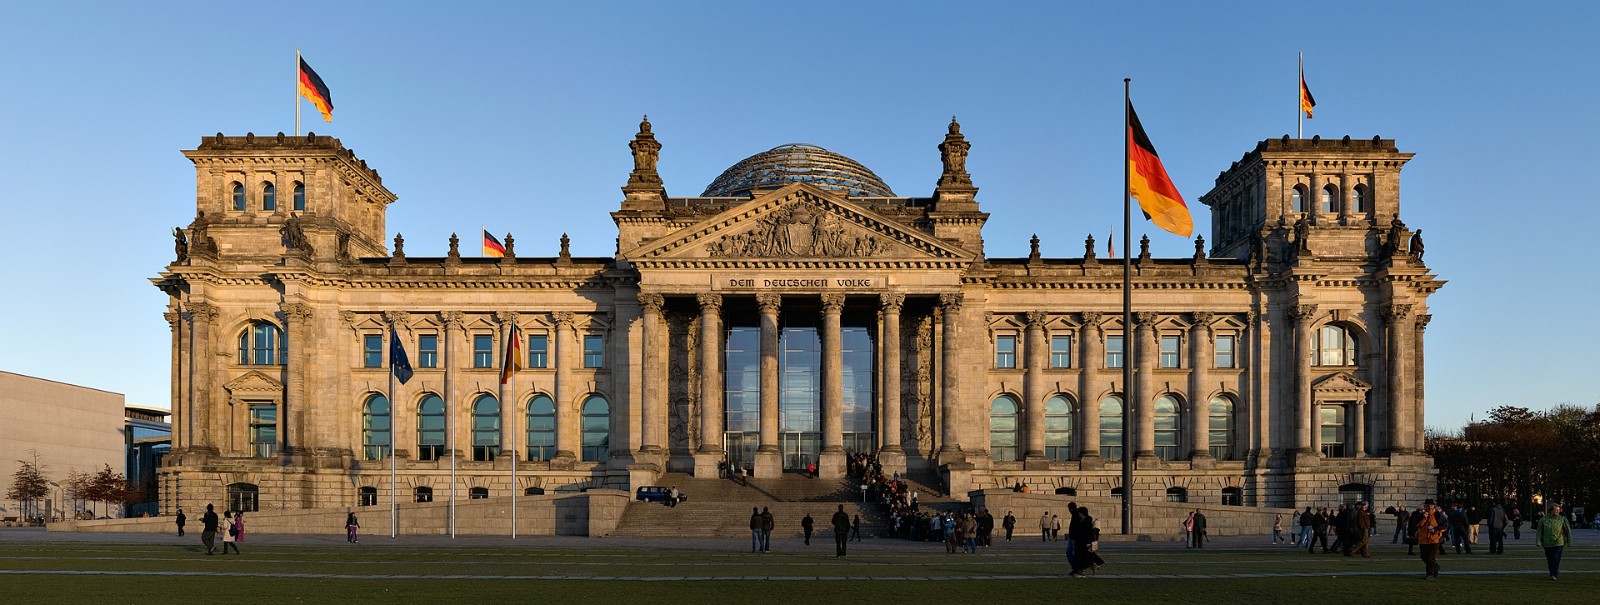 Reichstag_building_Berlin_view_from_west_before_sunset.jpg